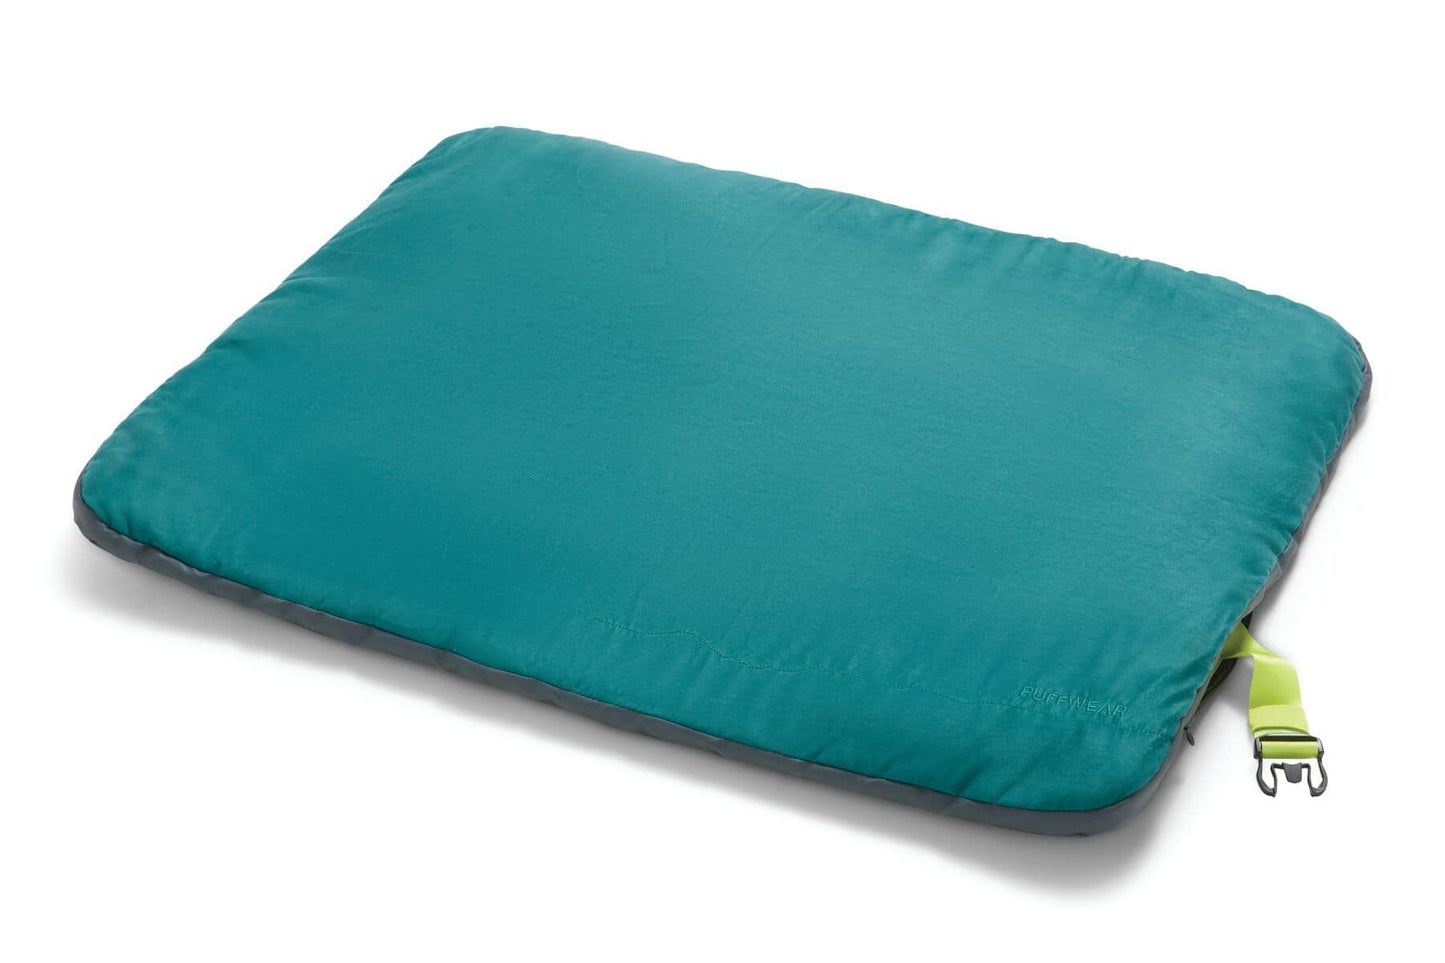 Ruffwear Mt. Bachelor Pad Roll Bed - Two Sizes Available